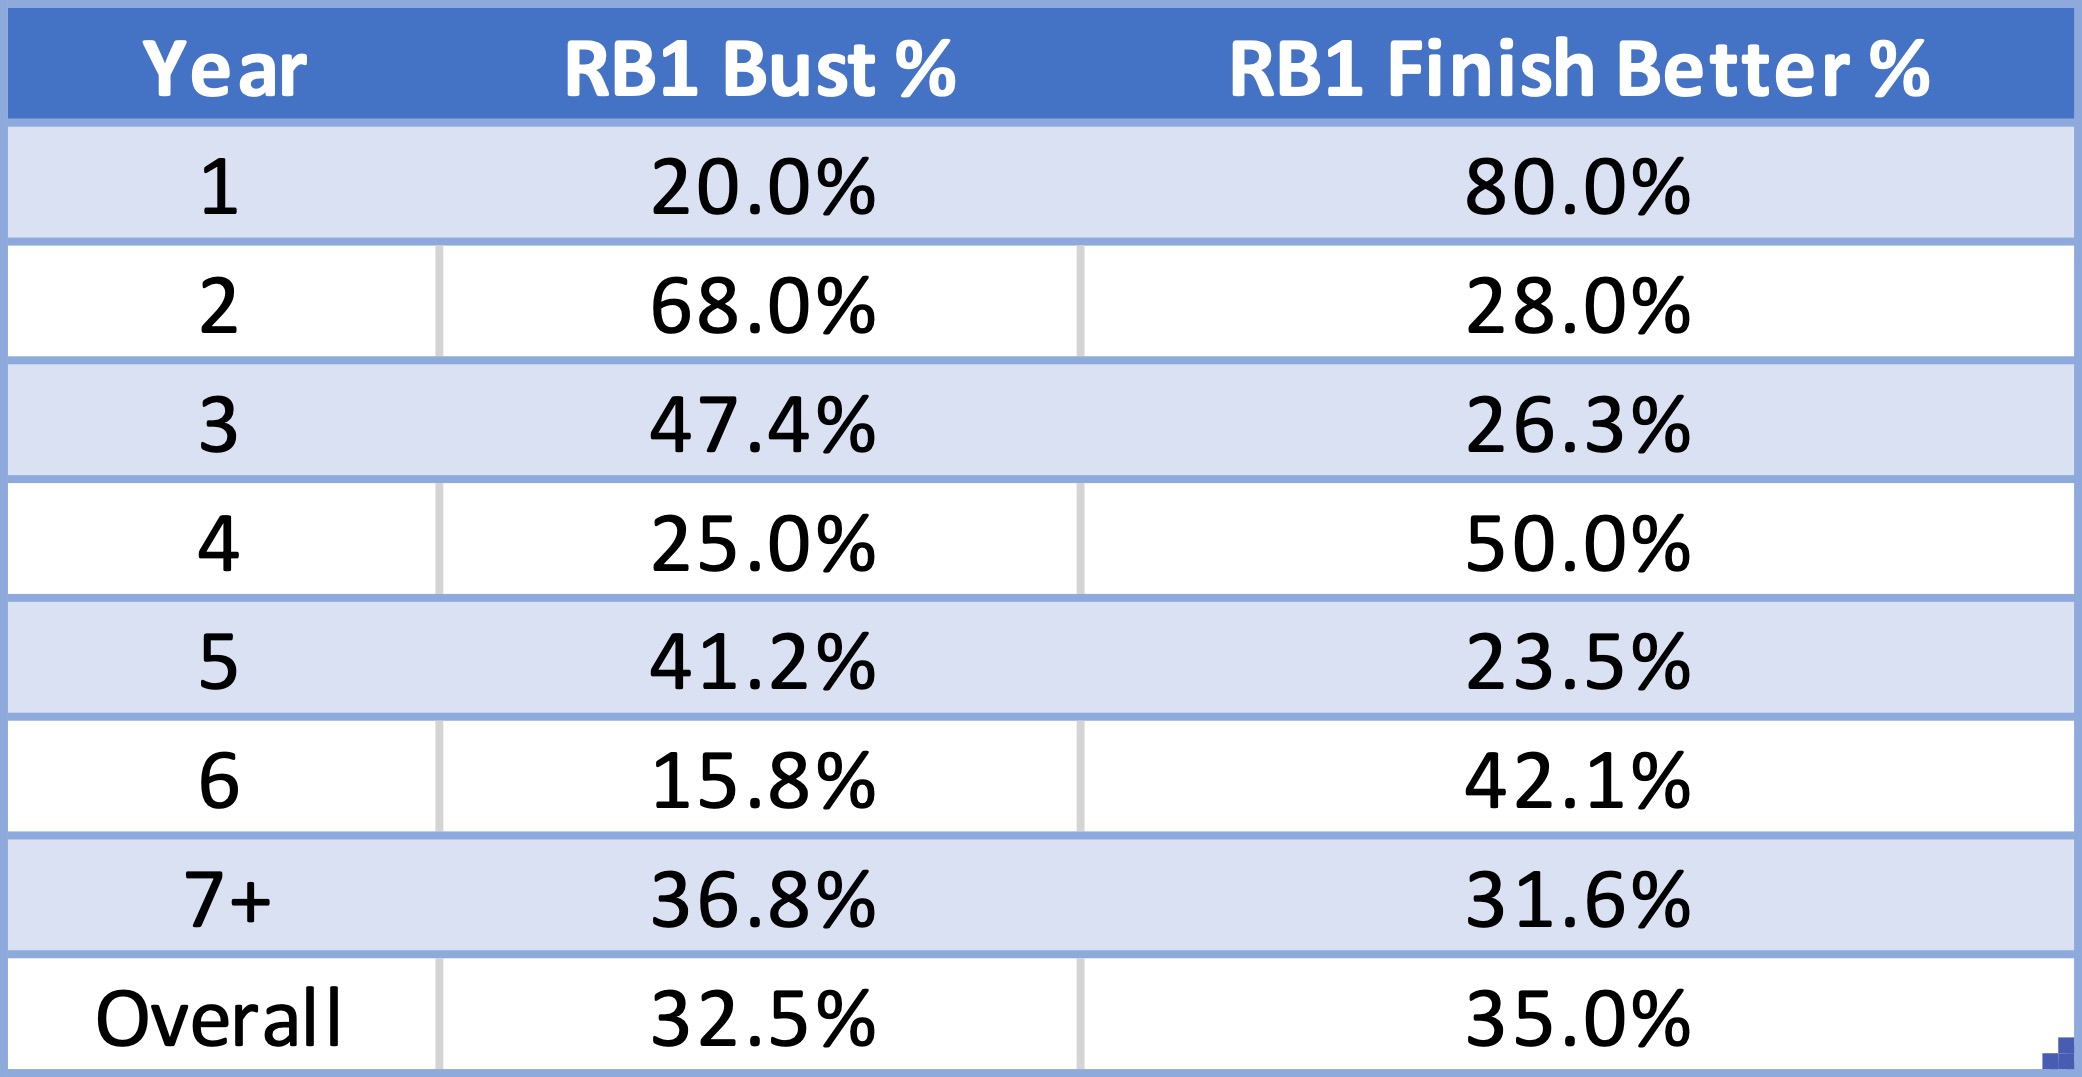 Year RB1% Bust RB1 % Finish Better